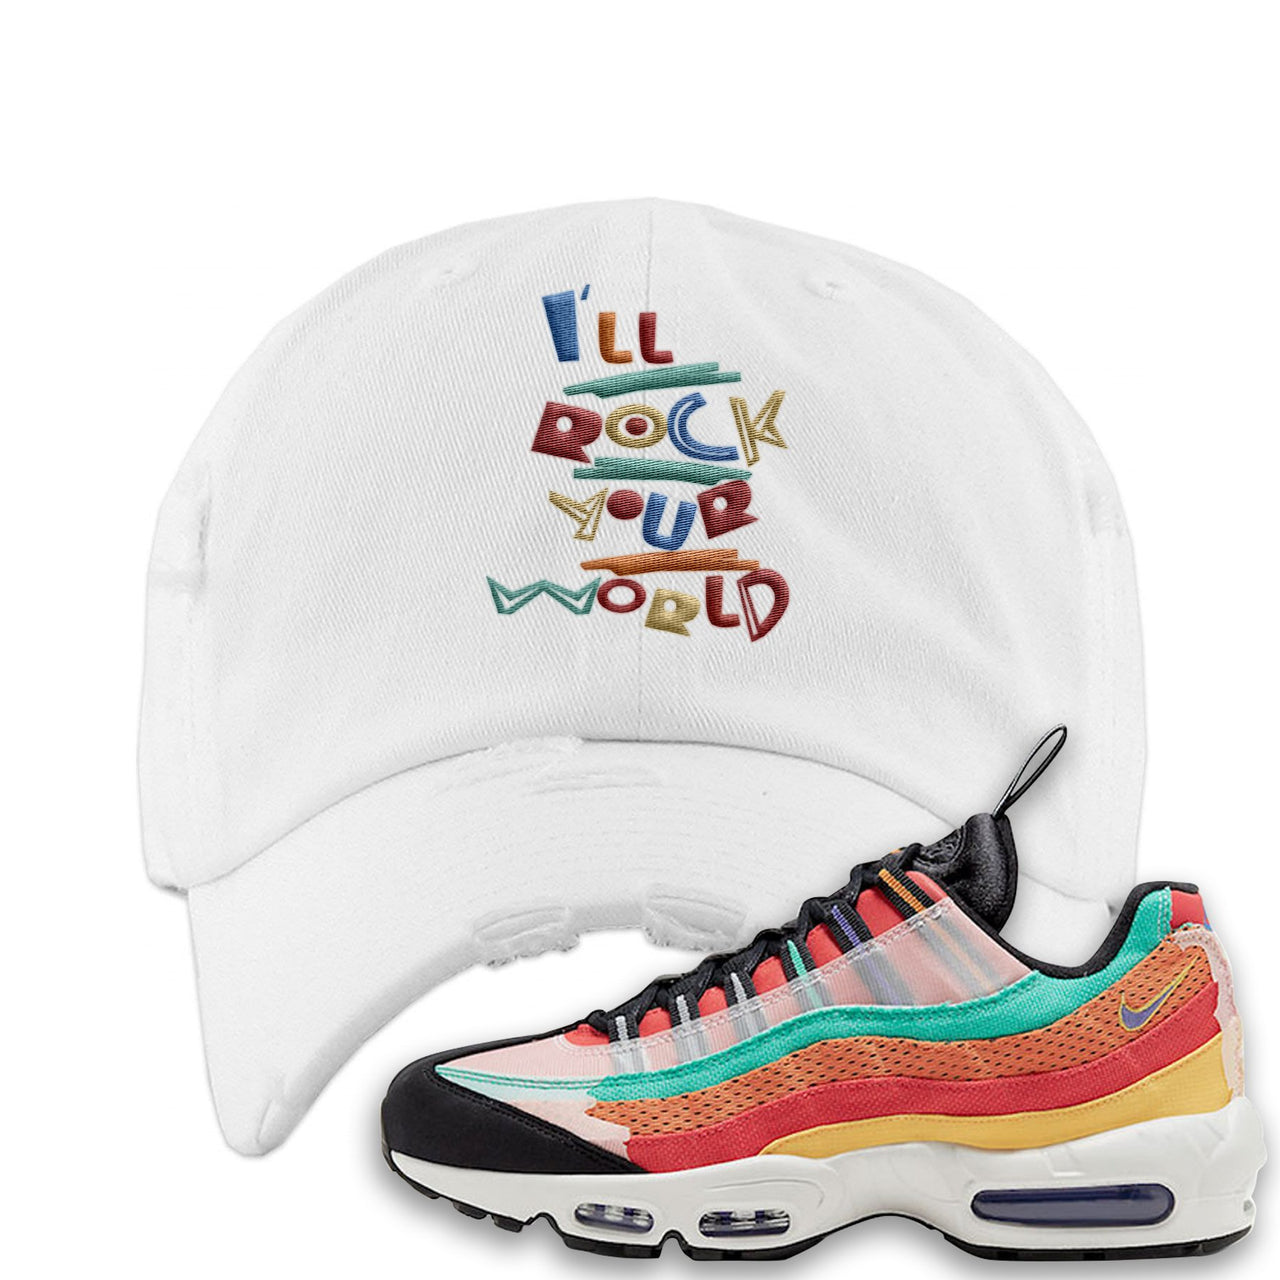 Air Max 95 Black History Month Sneaker White Distressed Dad Hat | Hat to match Air Max 95 Black History Month Shoes | I'll Rock Your World